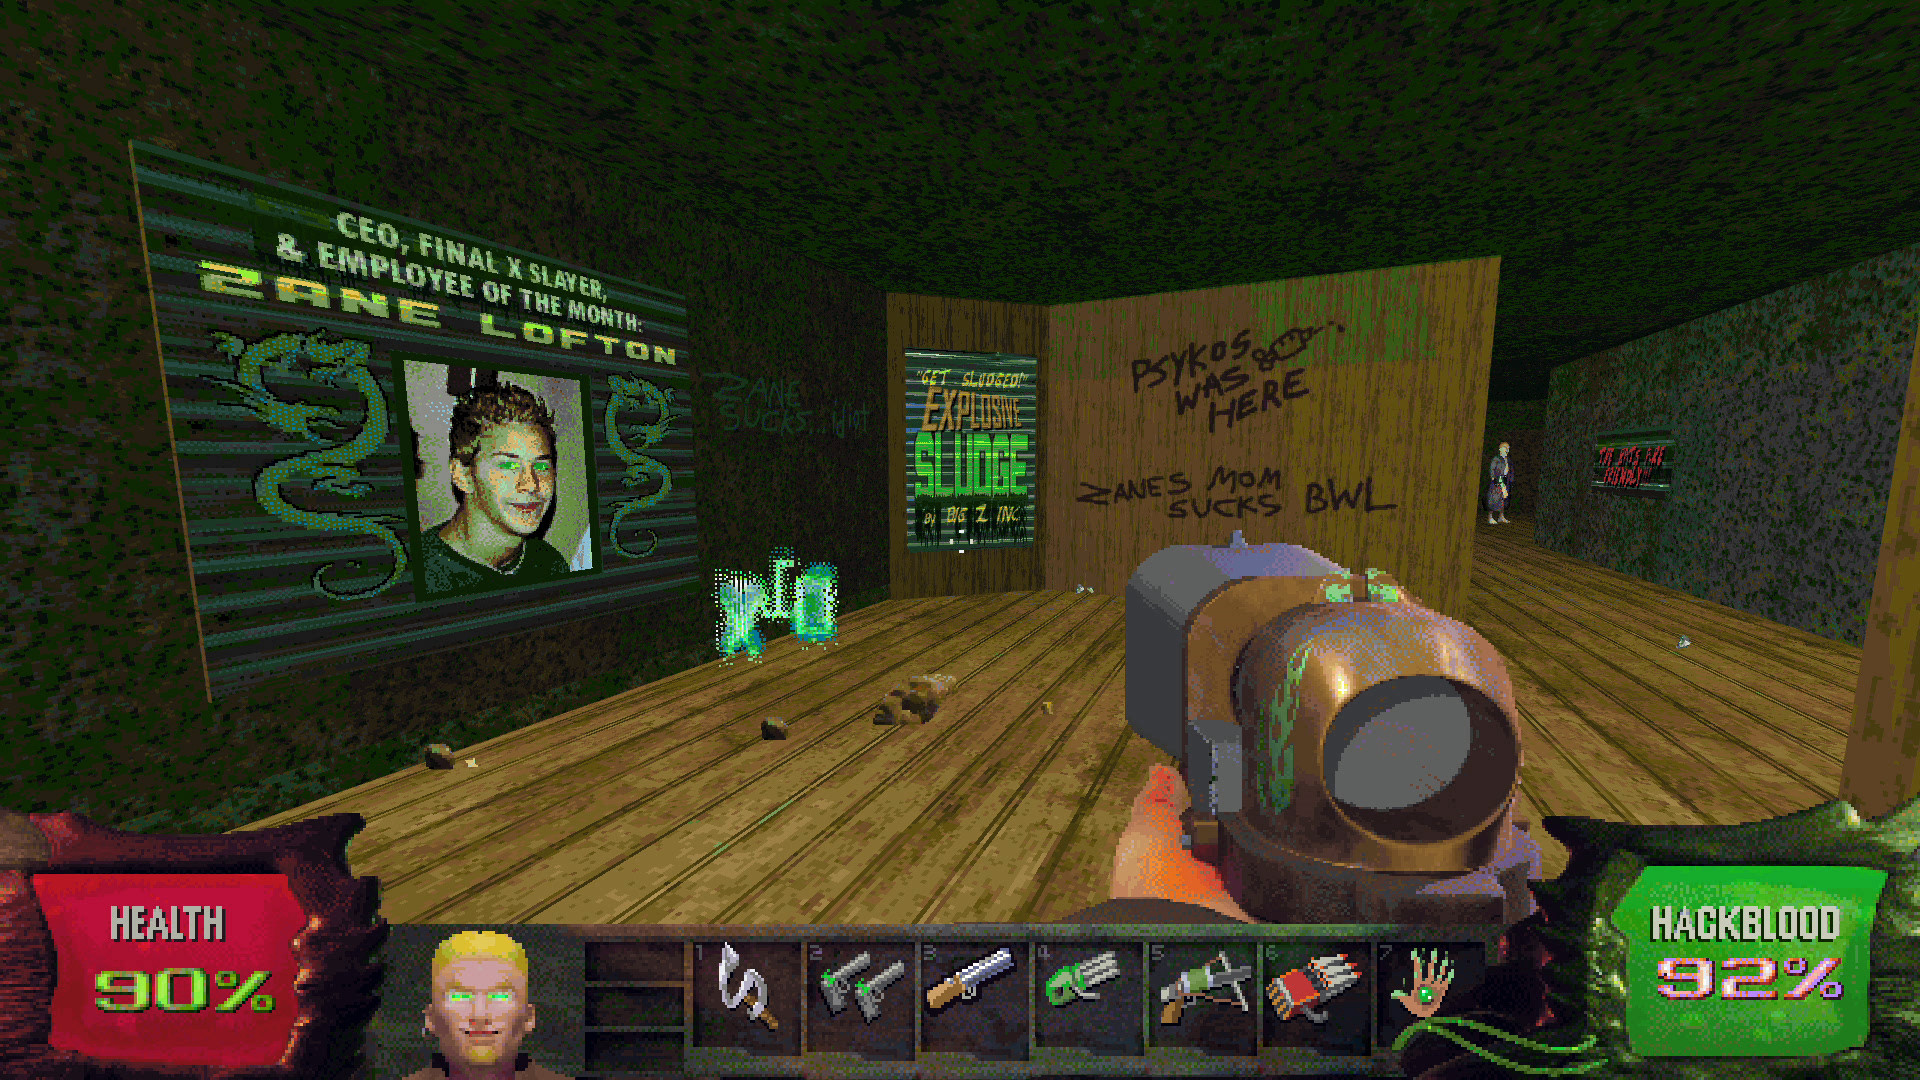 An image of the player holding a shotgunwhile looking at the wall of graffiti and a mural of themselves